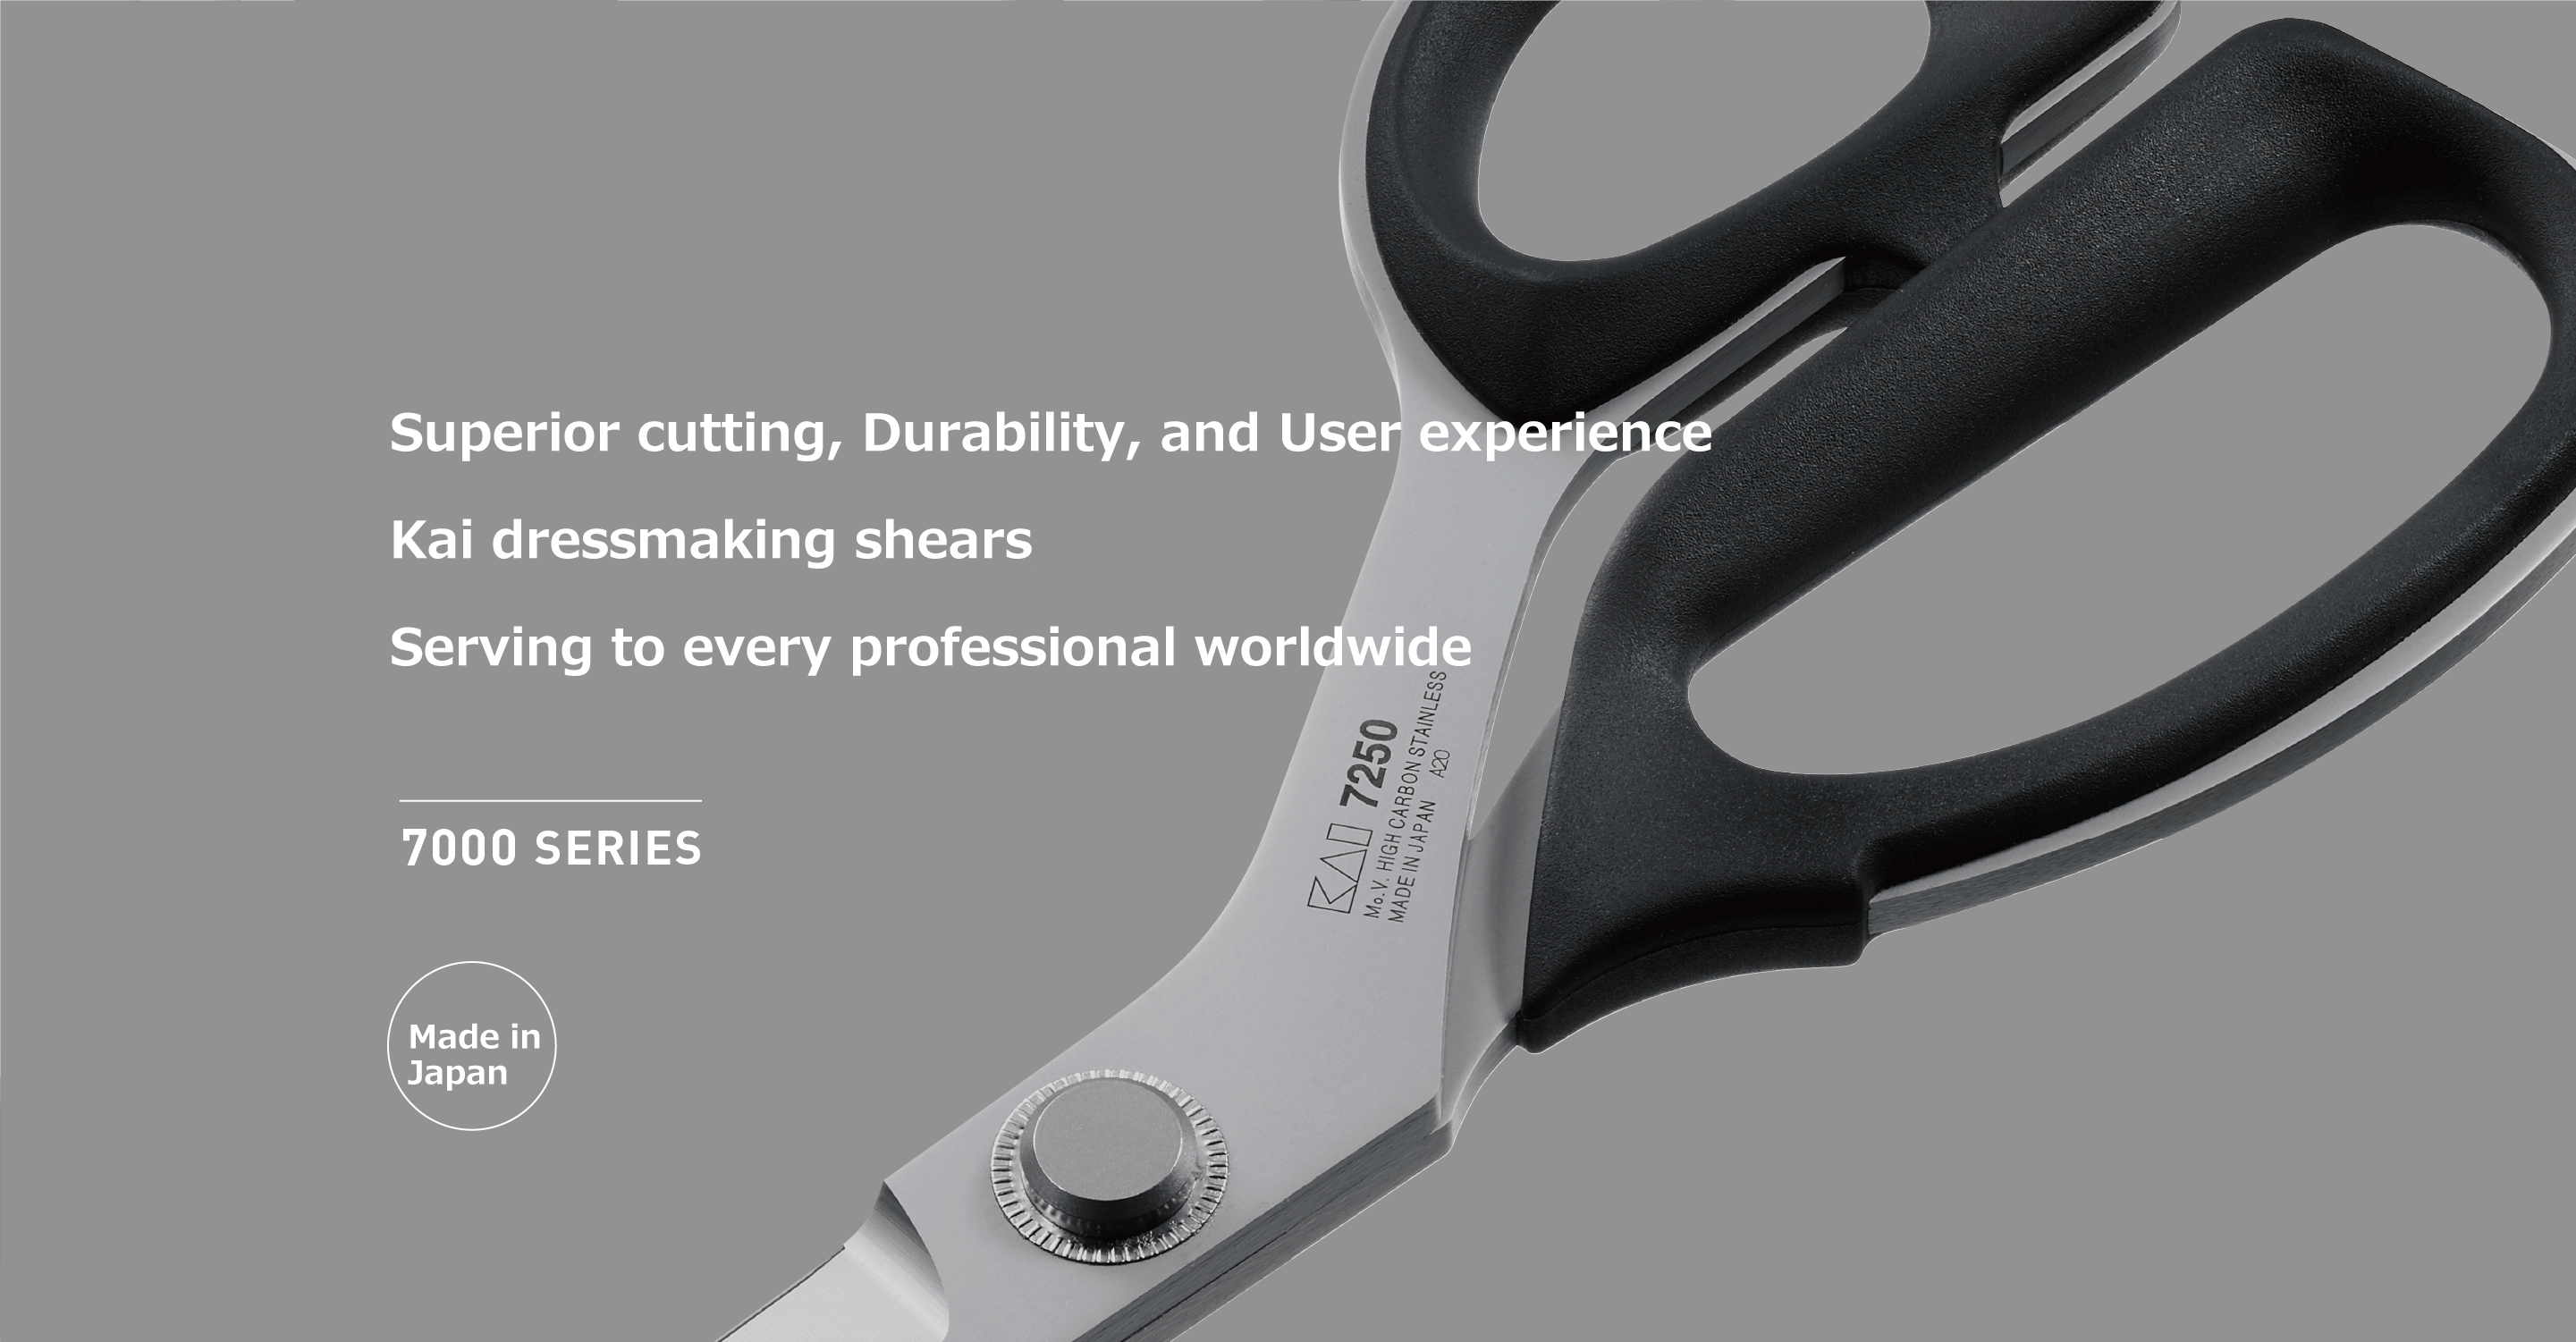 Superior cutting, Durability, and User experience Kai dressmaking shears, Serving to every professional worldwide